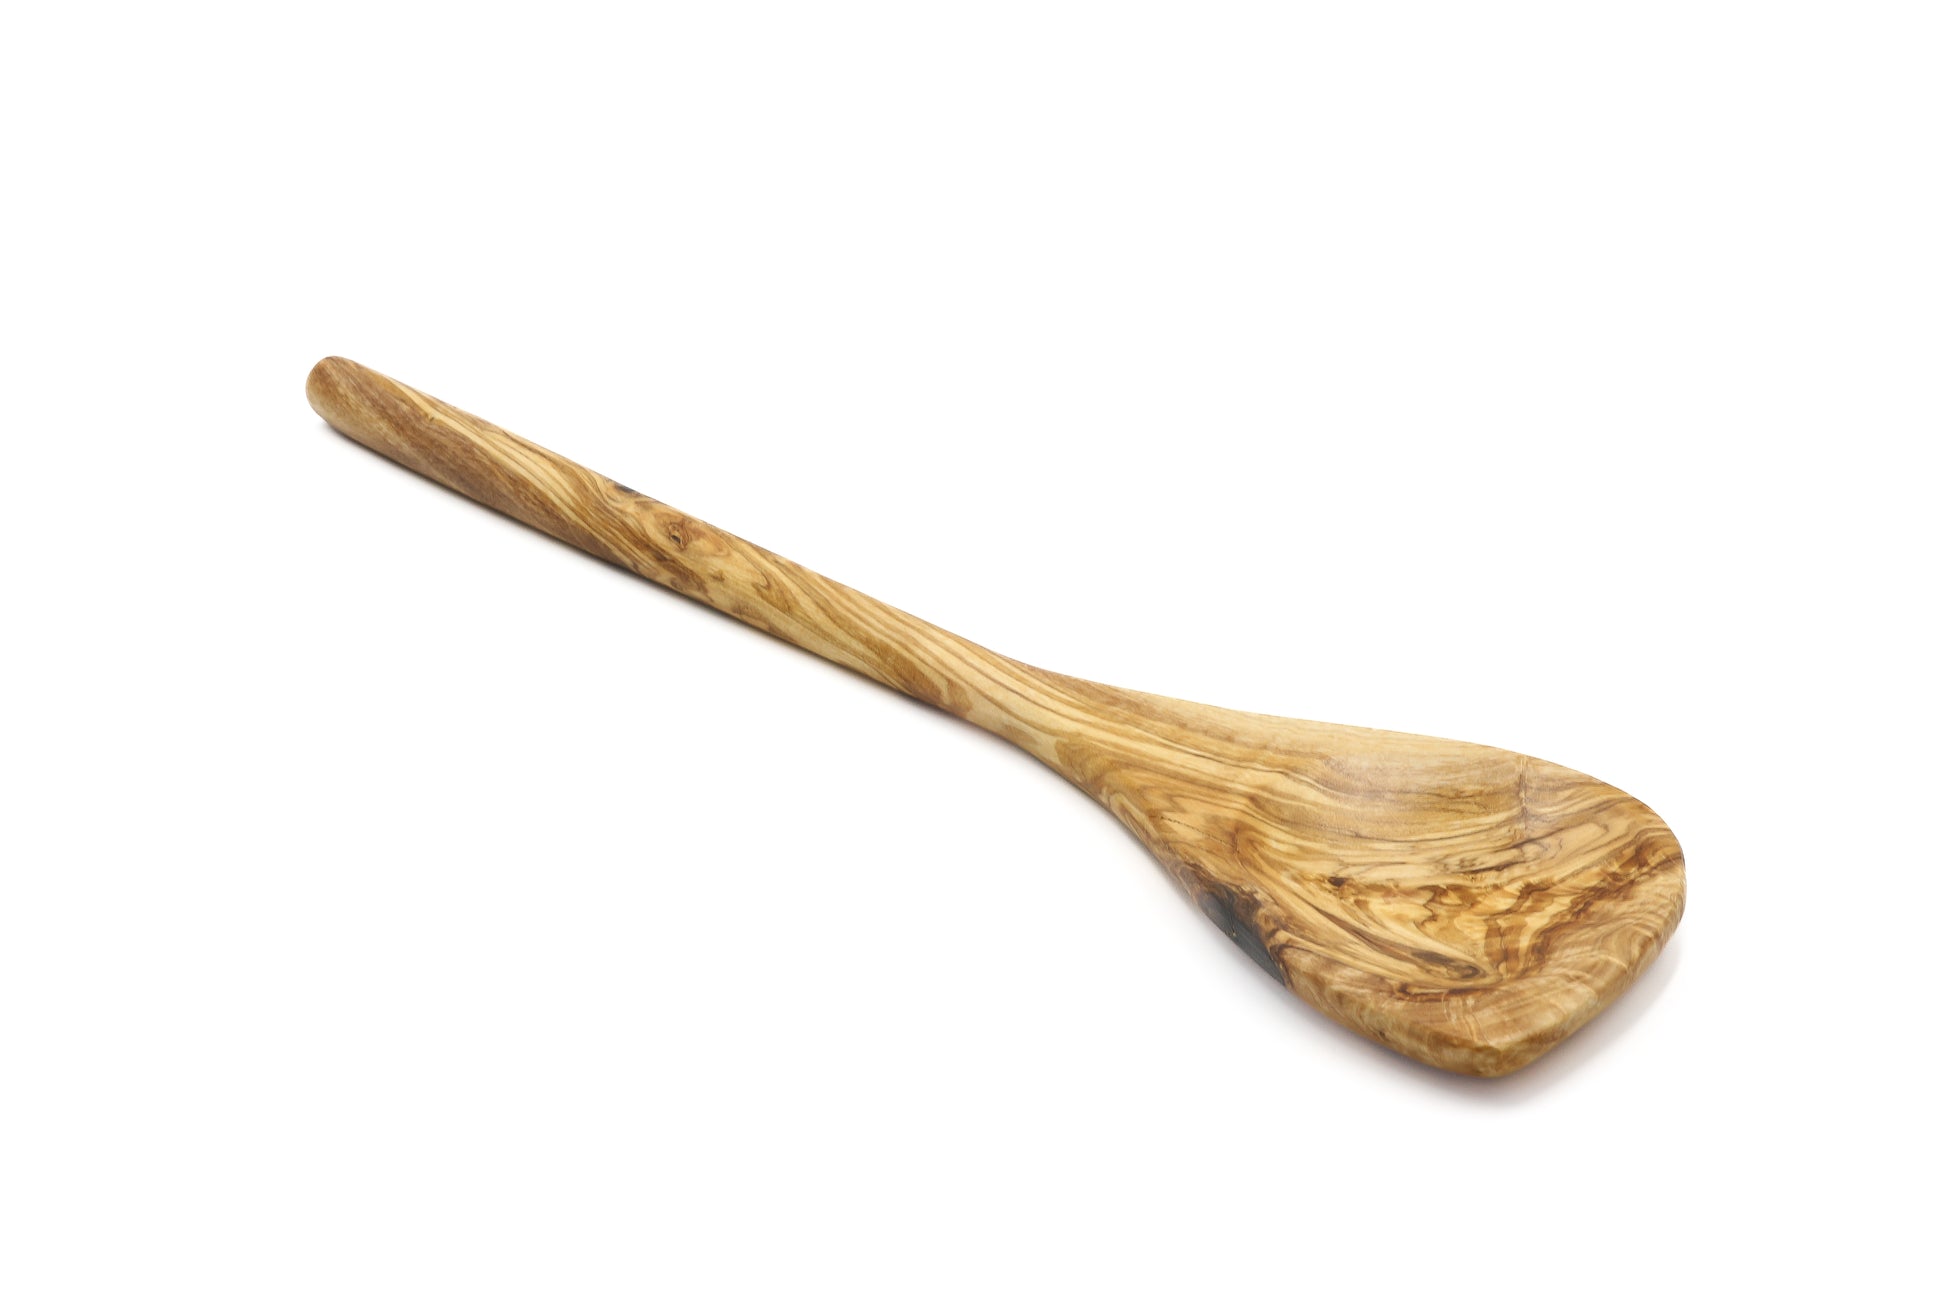 Hand-finished olive wood pointed stirring spoon